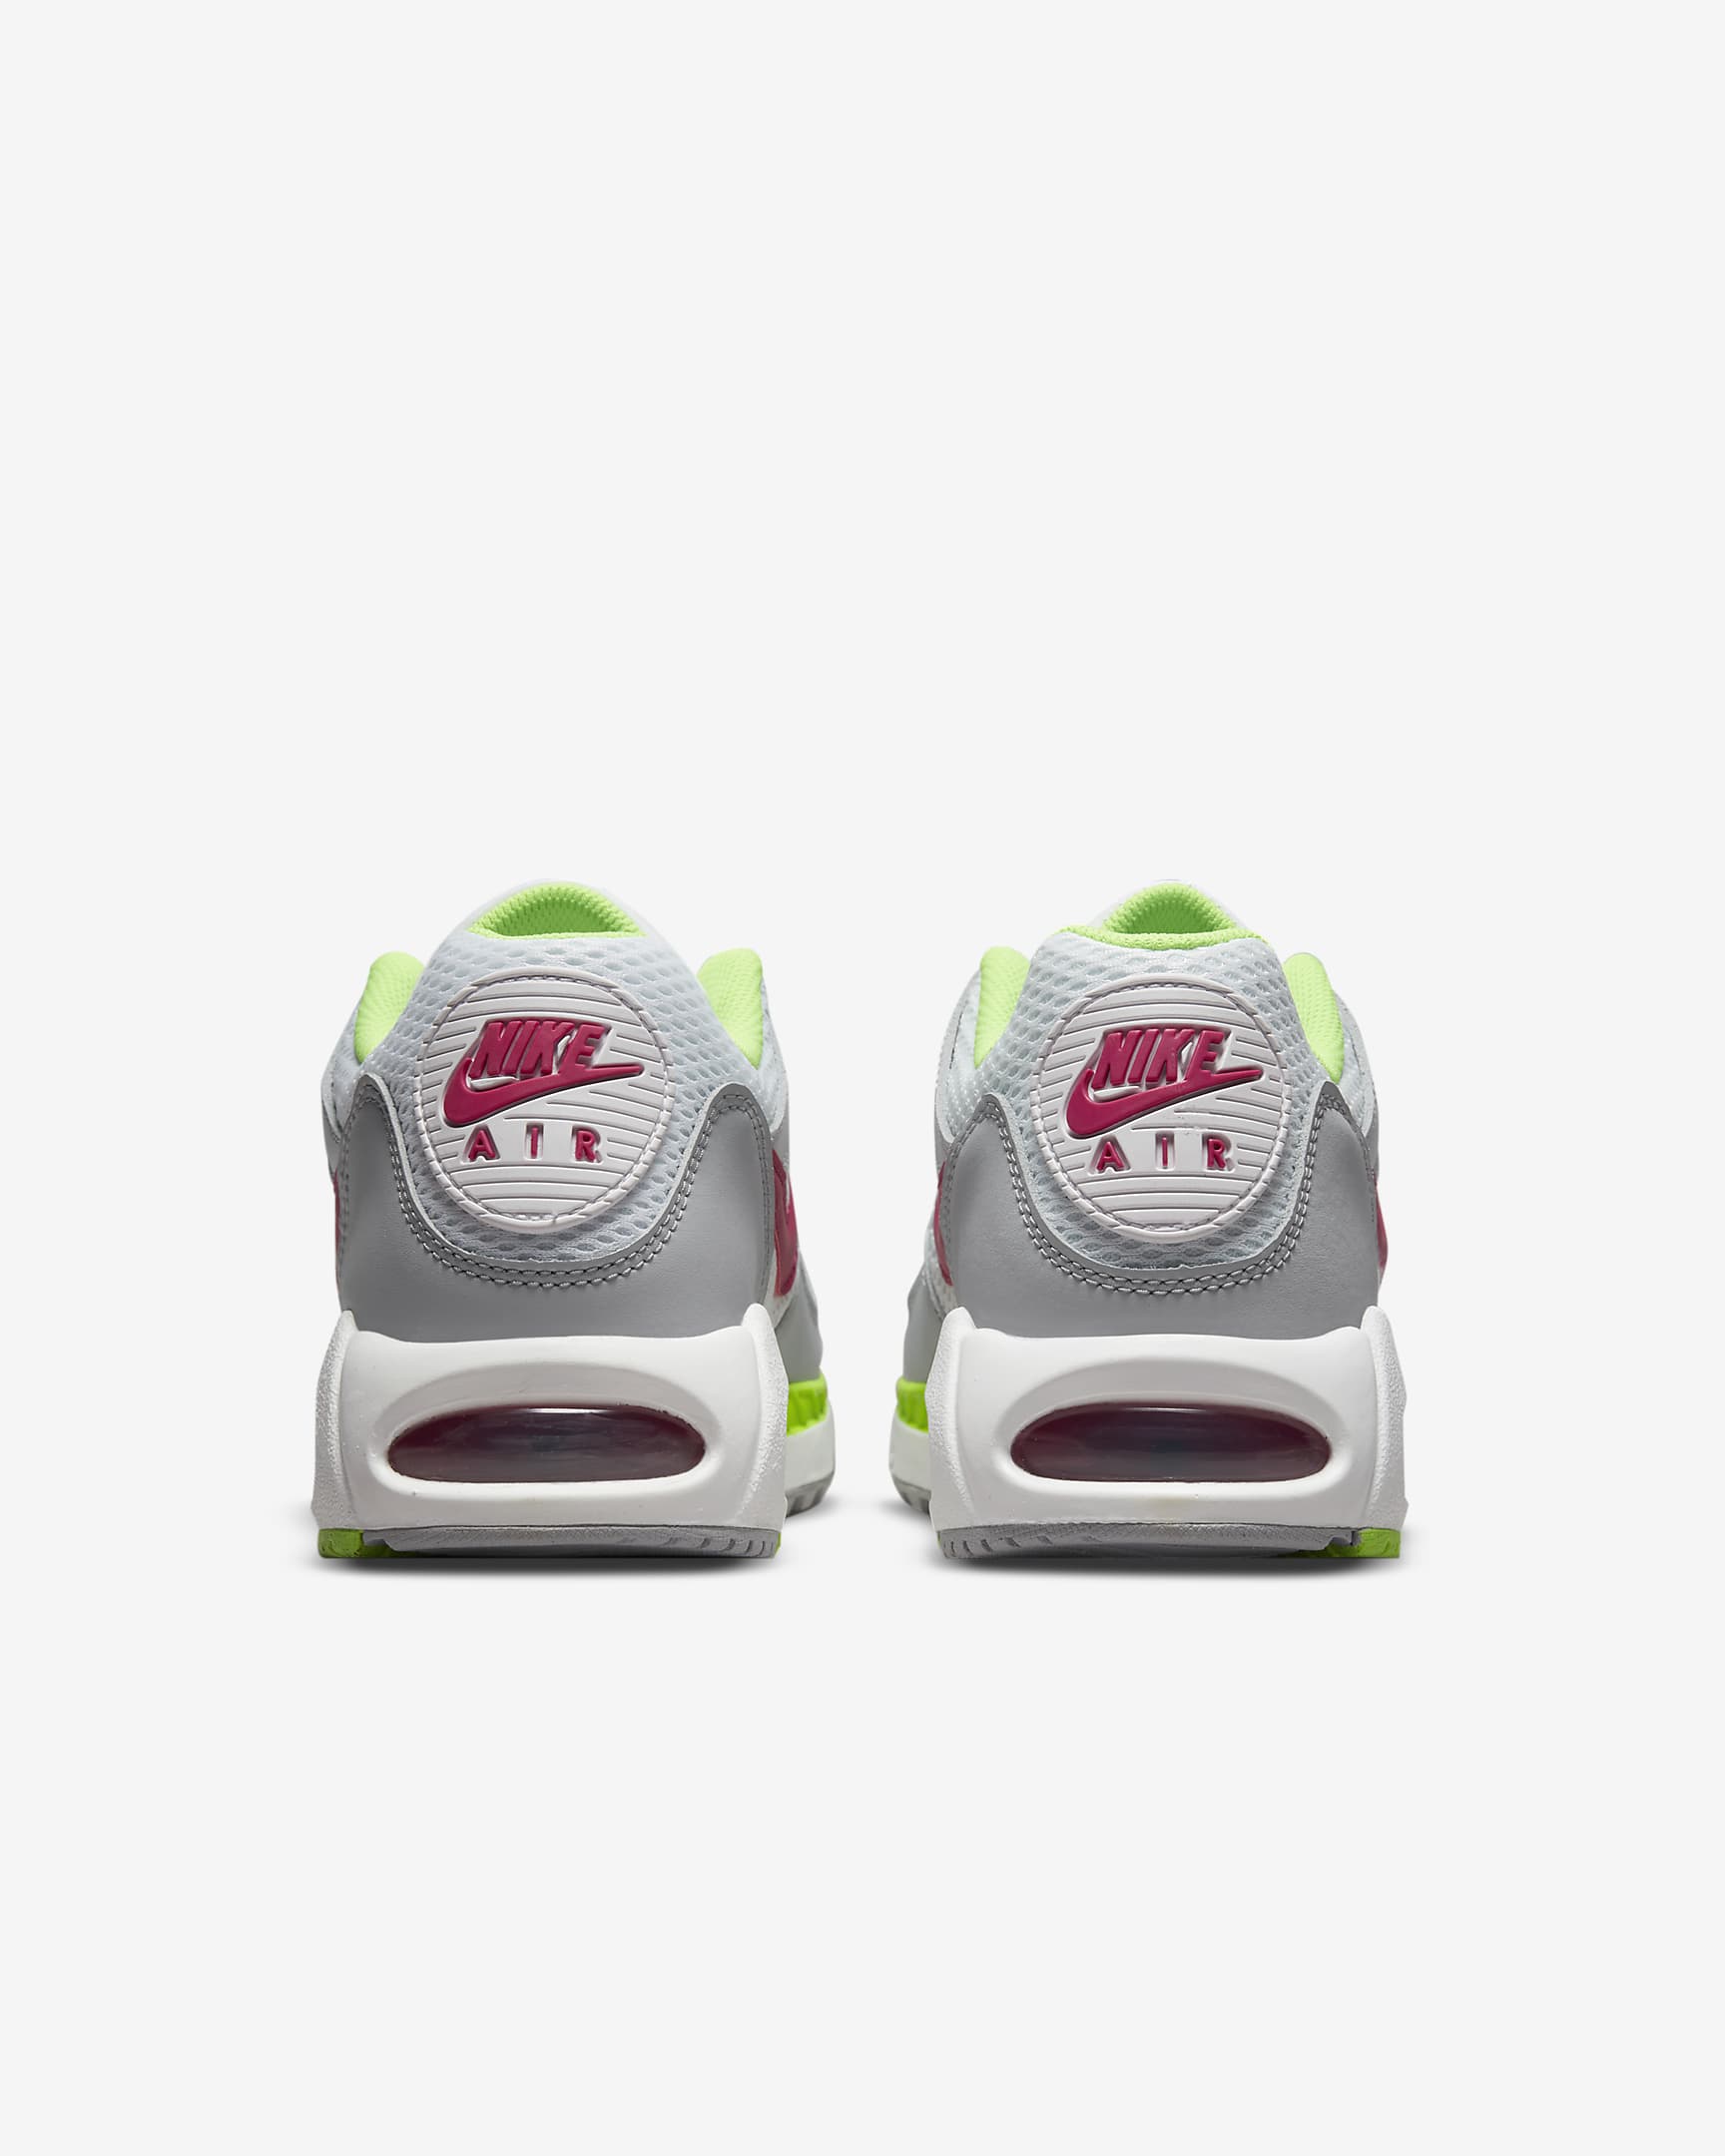 Nike Air Max Correlate Women's Shoes - White/Pure Platinum/Wolf Grey/Fireberry